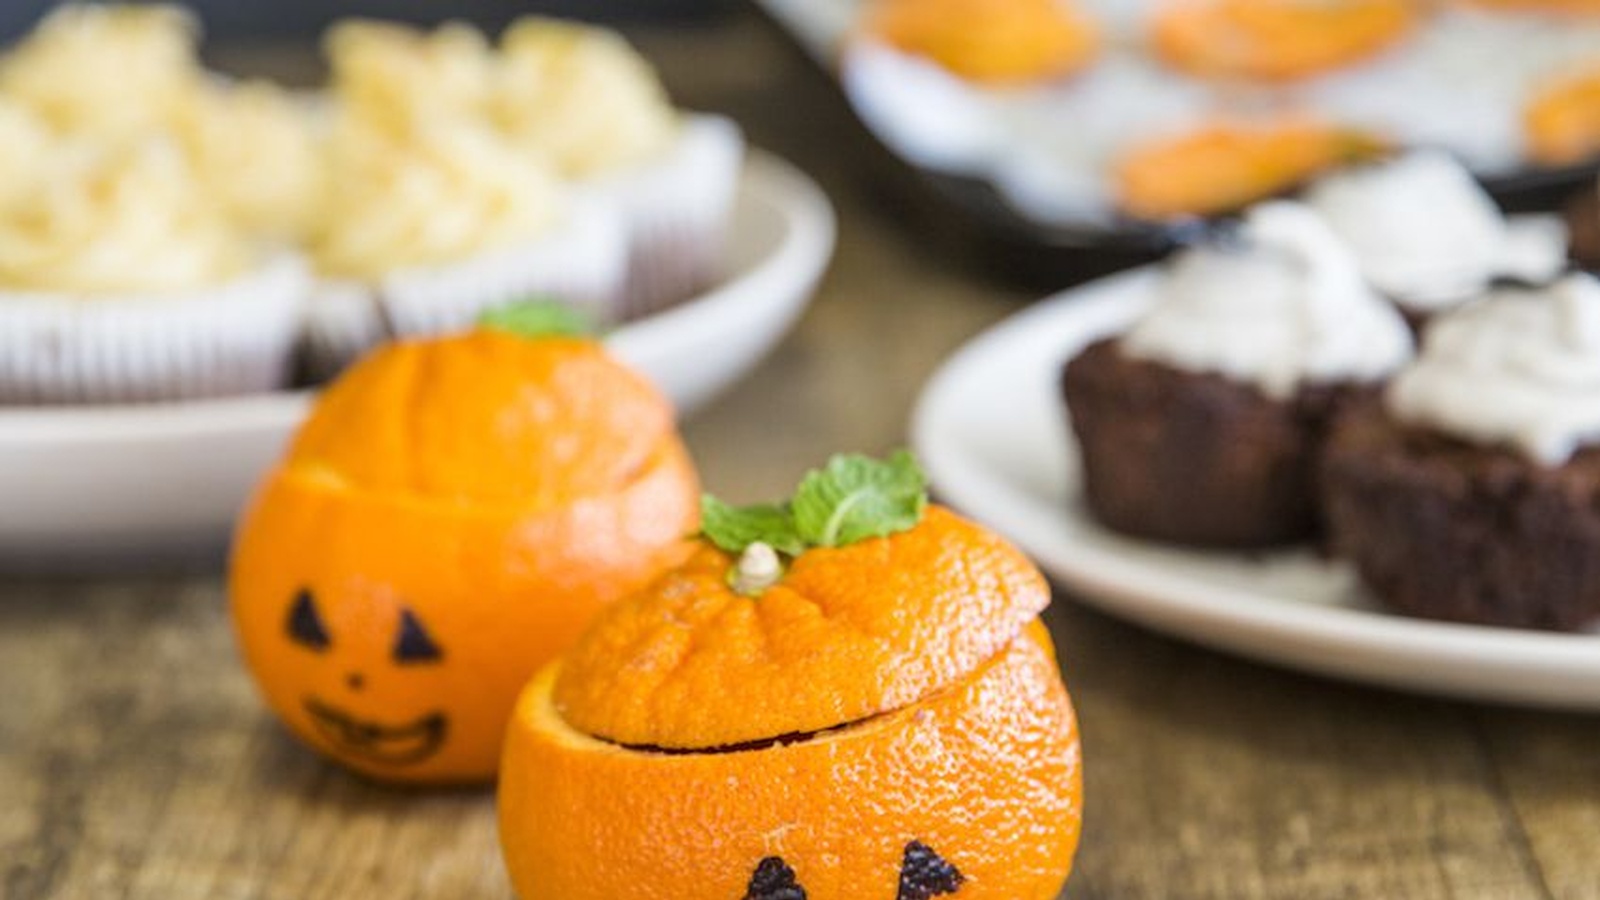 10 Of The Best Healthy Halloween Recipes!